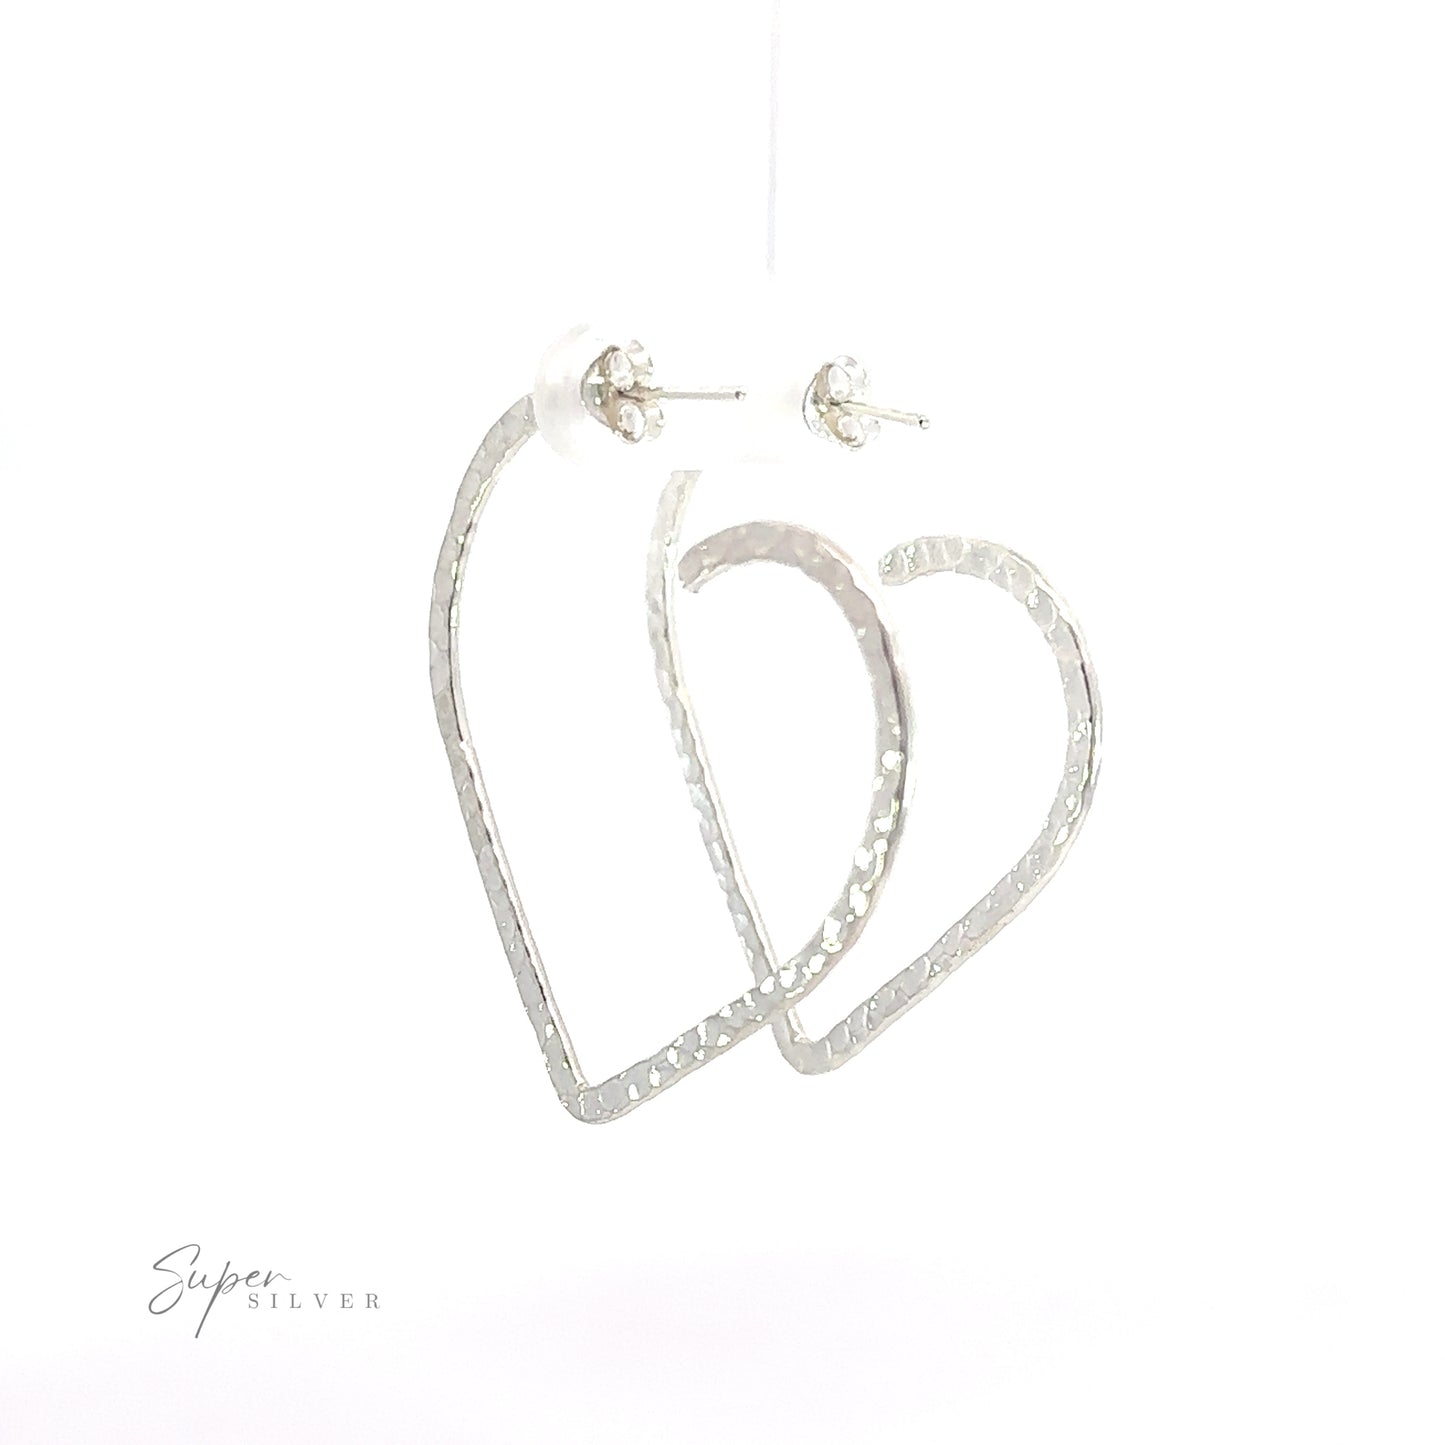 
                  
                    A pair of Textured Heart Hoop Earrings, made from .925 sterling silver, hanging on a white background.
                  
                